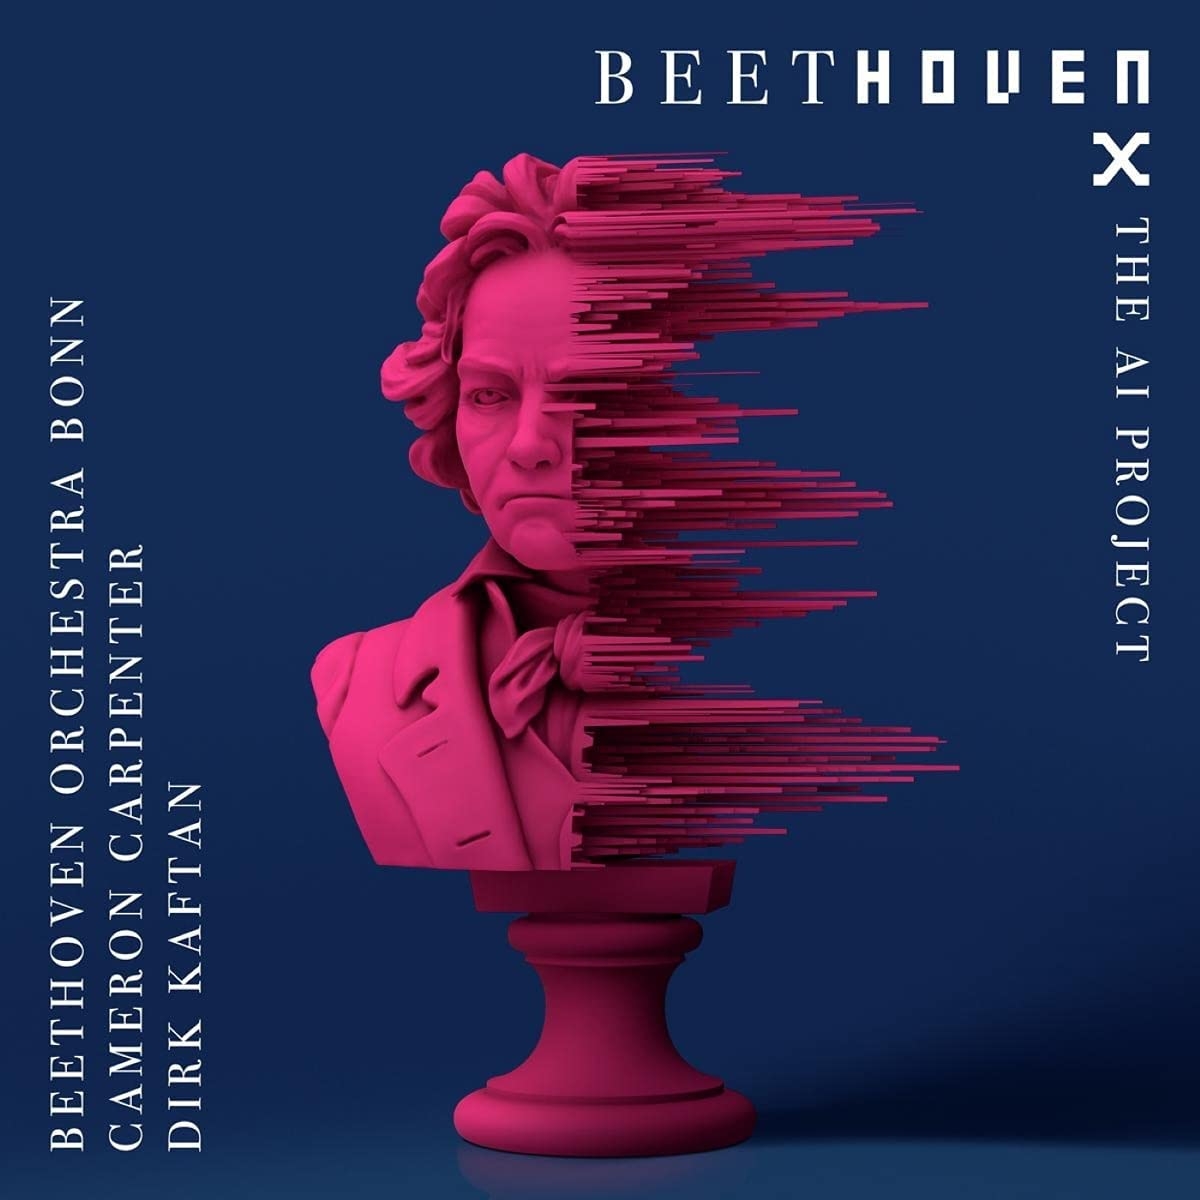 BEETHOVEN X. THE AI PROJECT